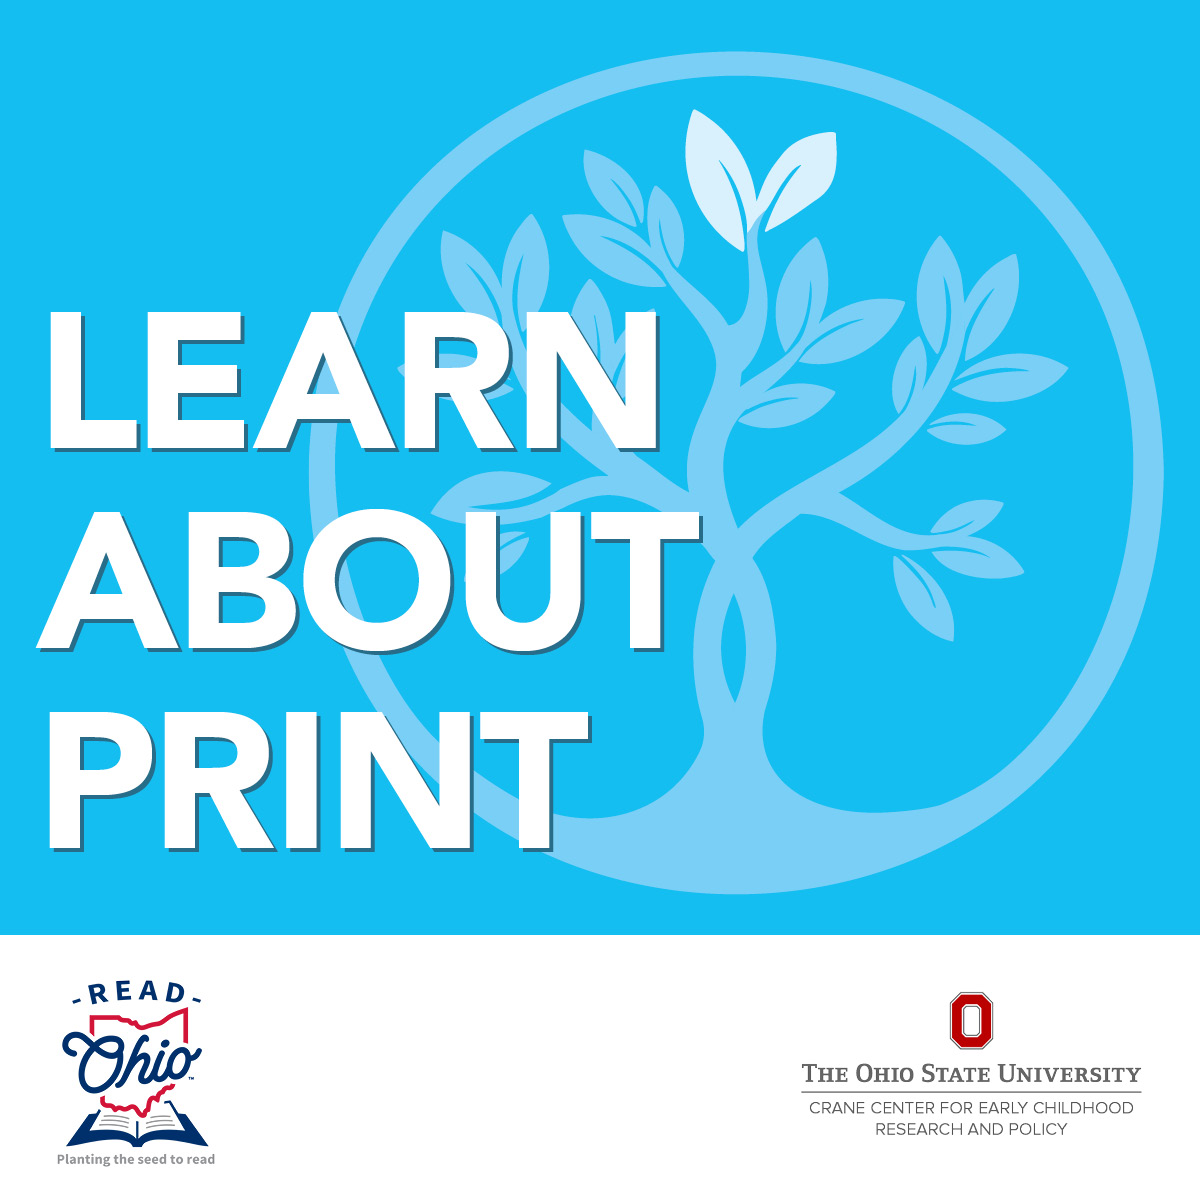 Read Together, Grow Together tree logo in one color (light blue) with the words "learn about print" on top.